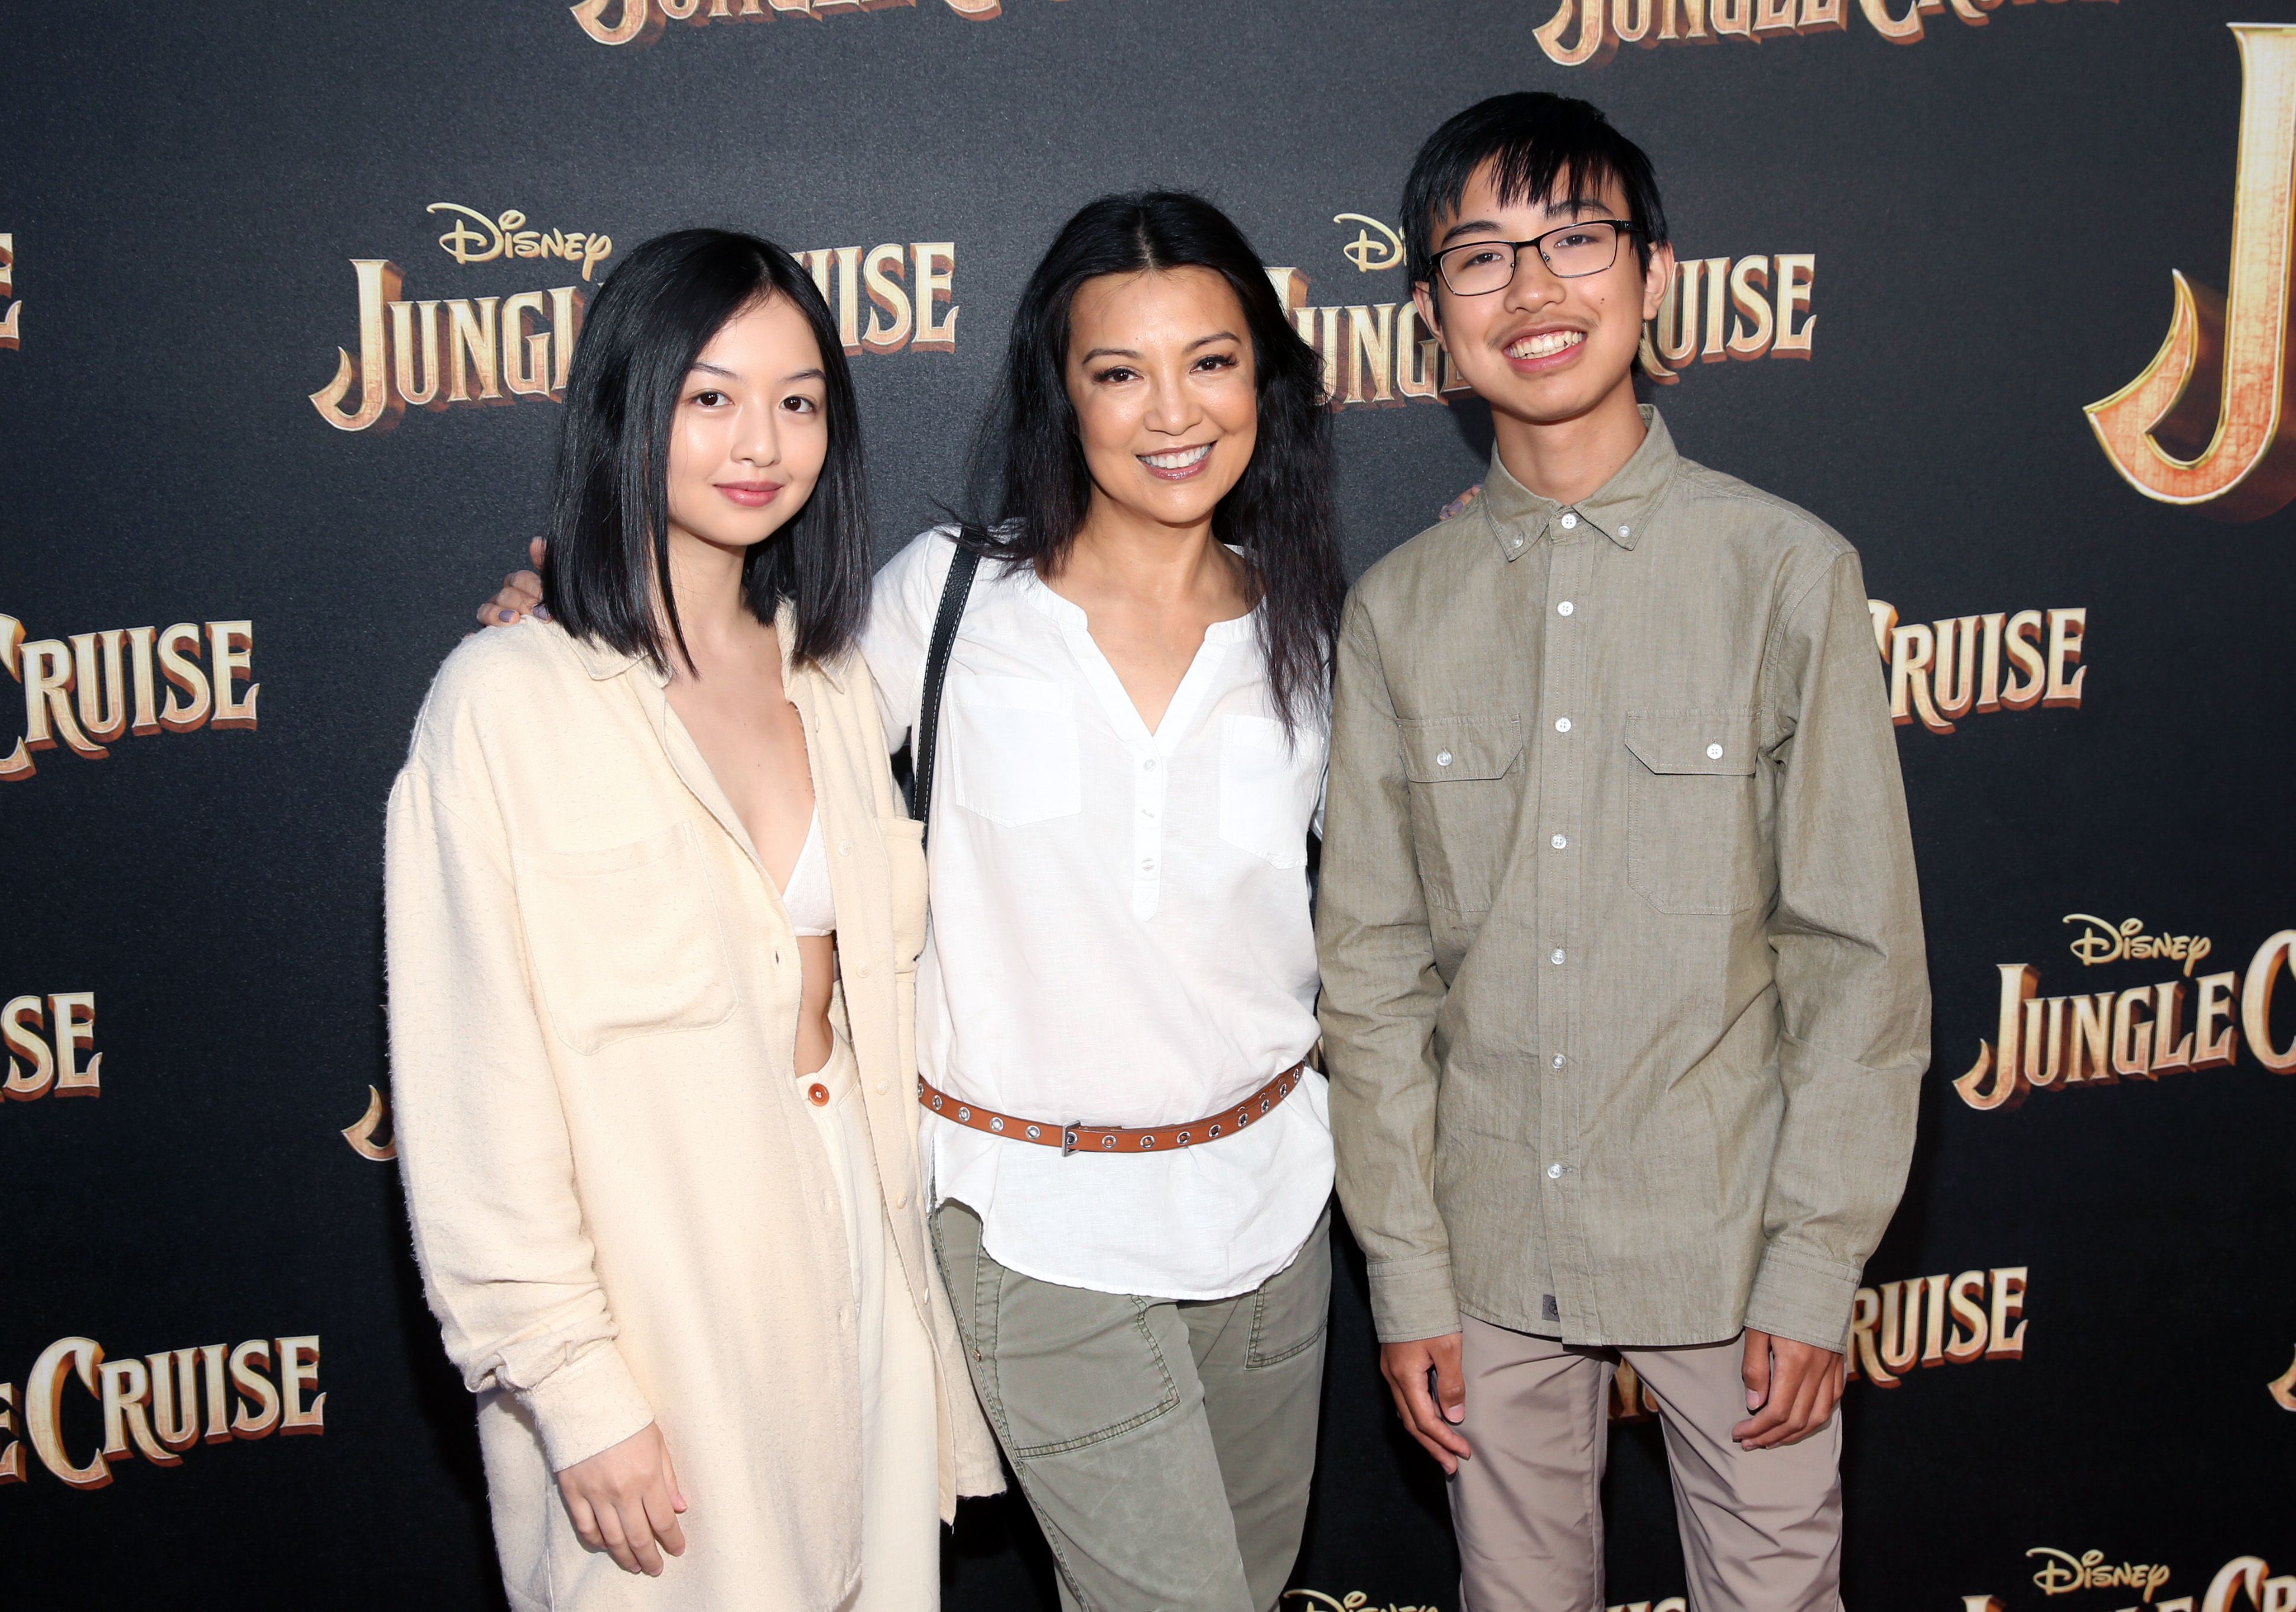 Michaela Zee, Ming-Na Wen, and Cooper Dominic Zee at the world premiere of "Jungle Cruise" on July 24, 2021, in California | Source: Getty Images